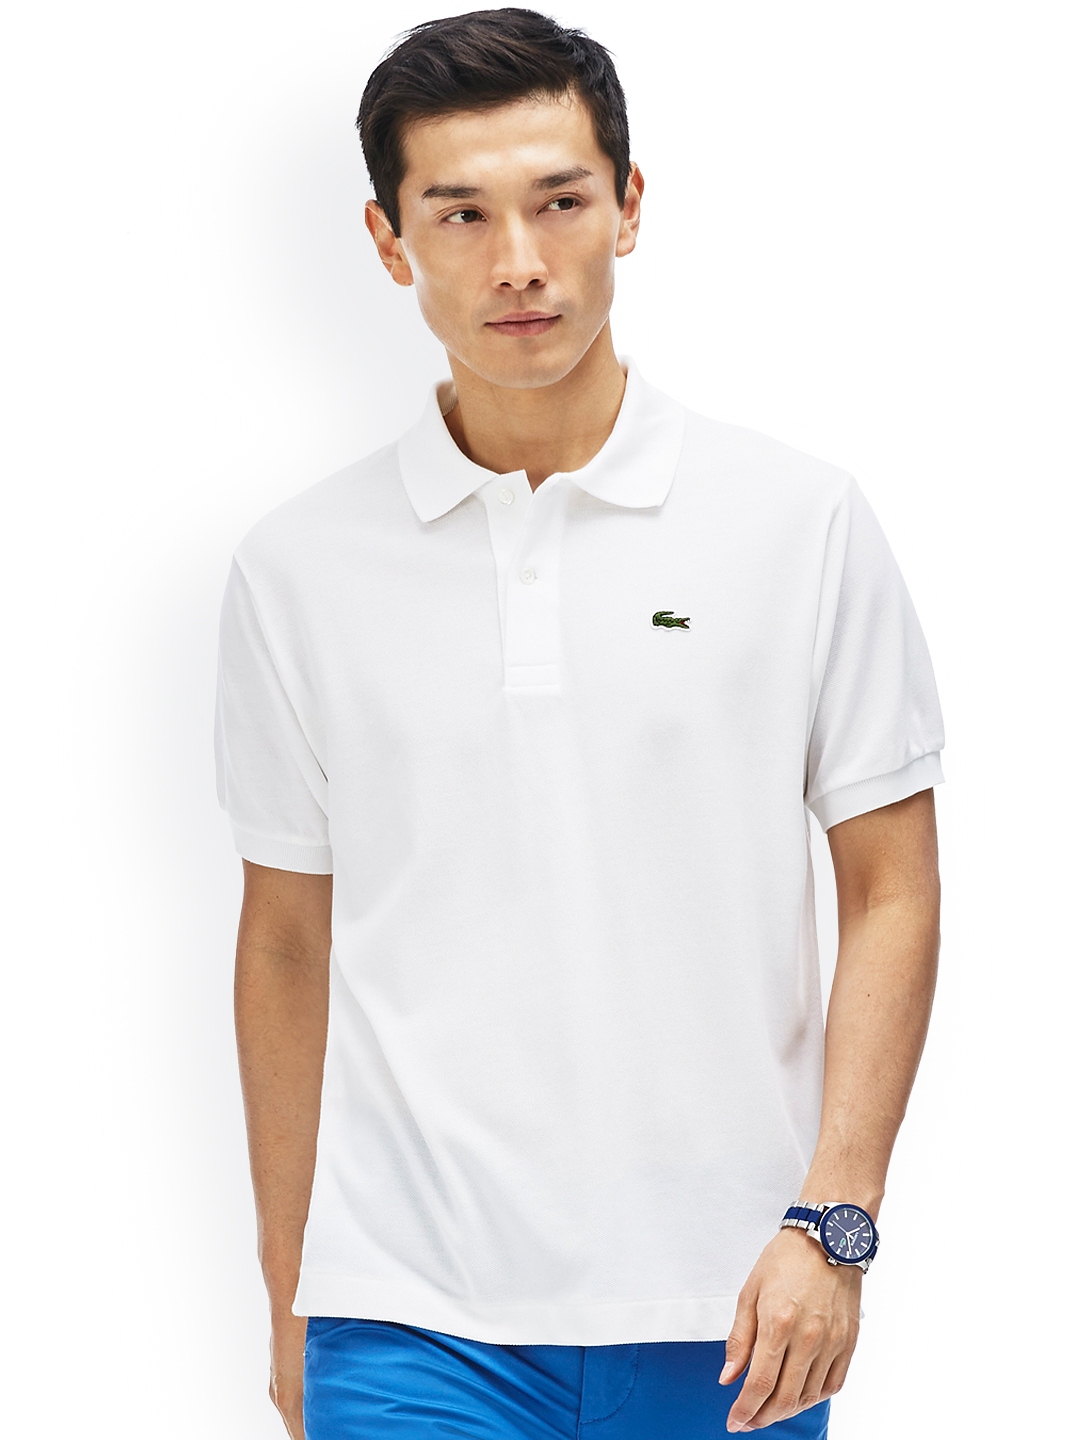 Buy Lacoste White Classic Fit L.12.12 Polo - Tshirts for Men | Myntra